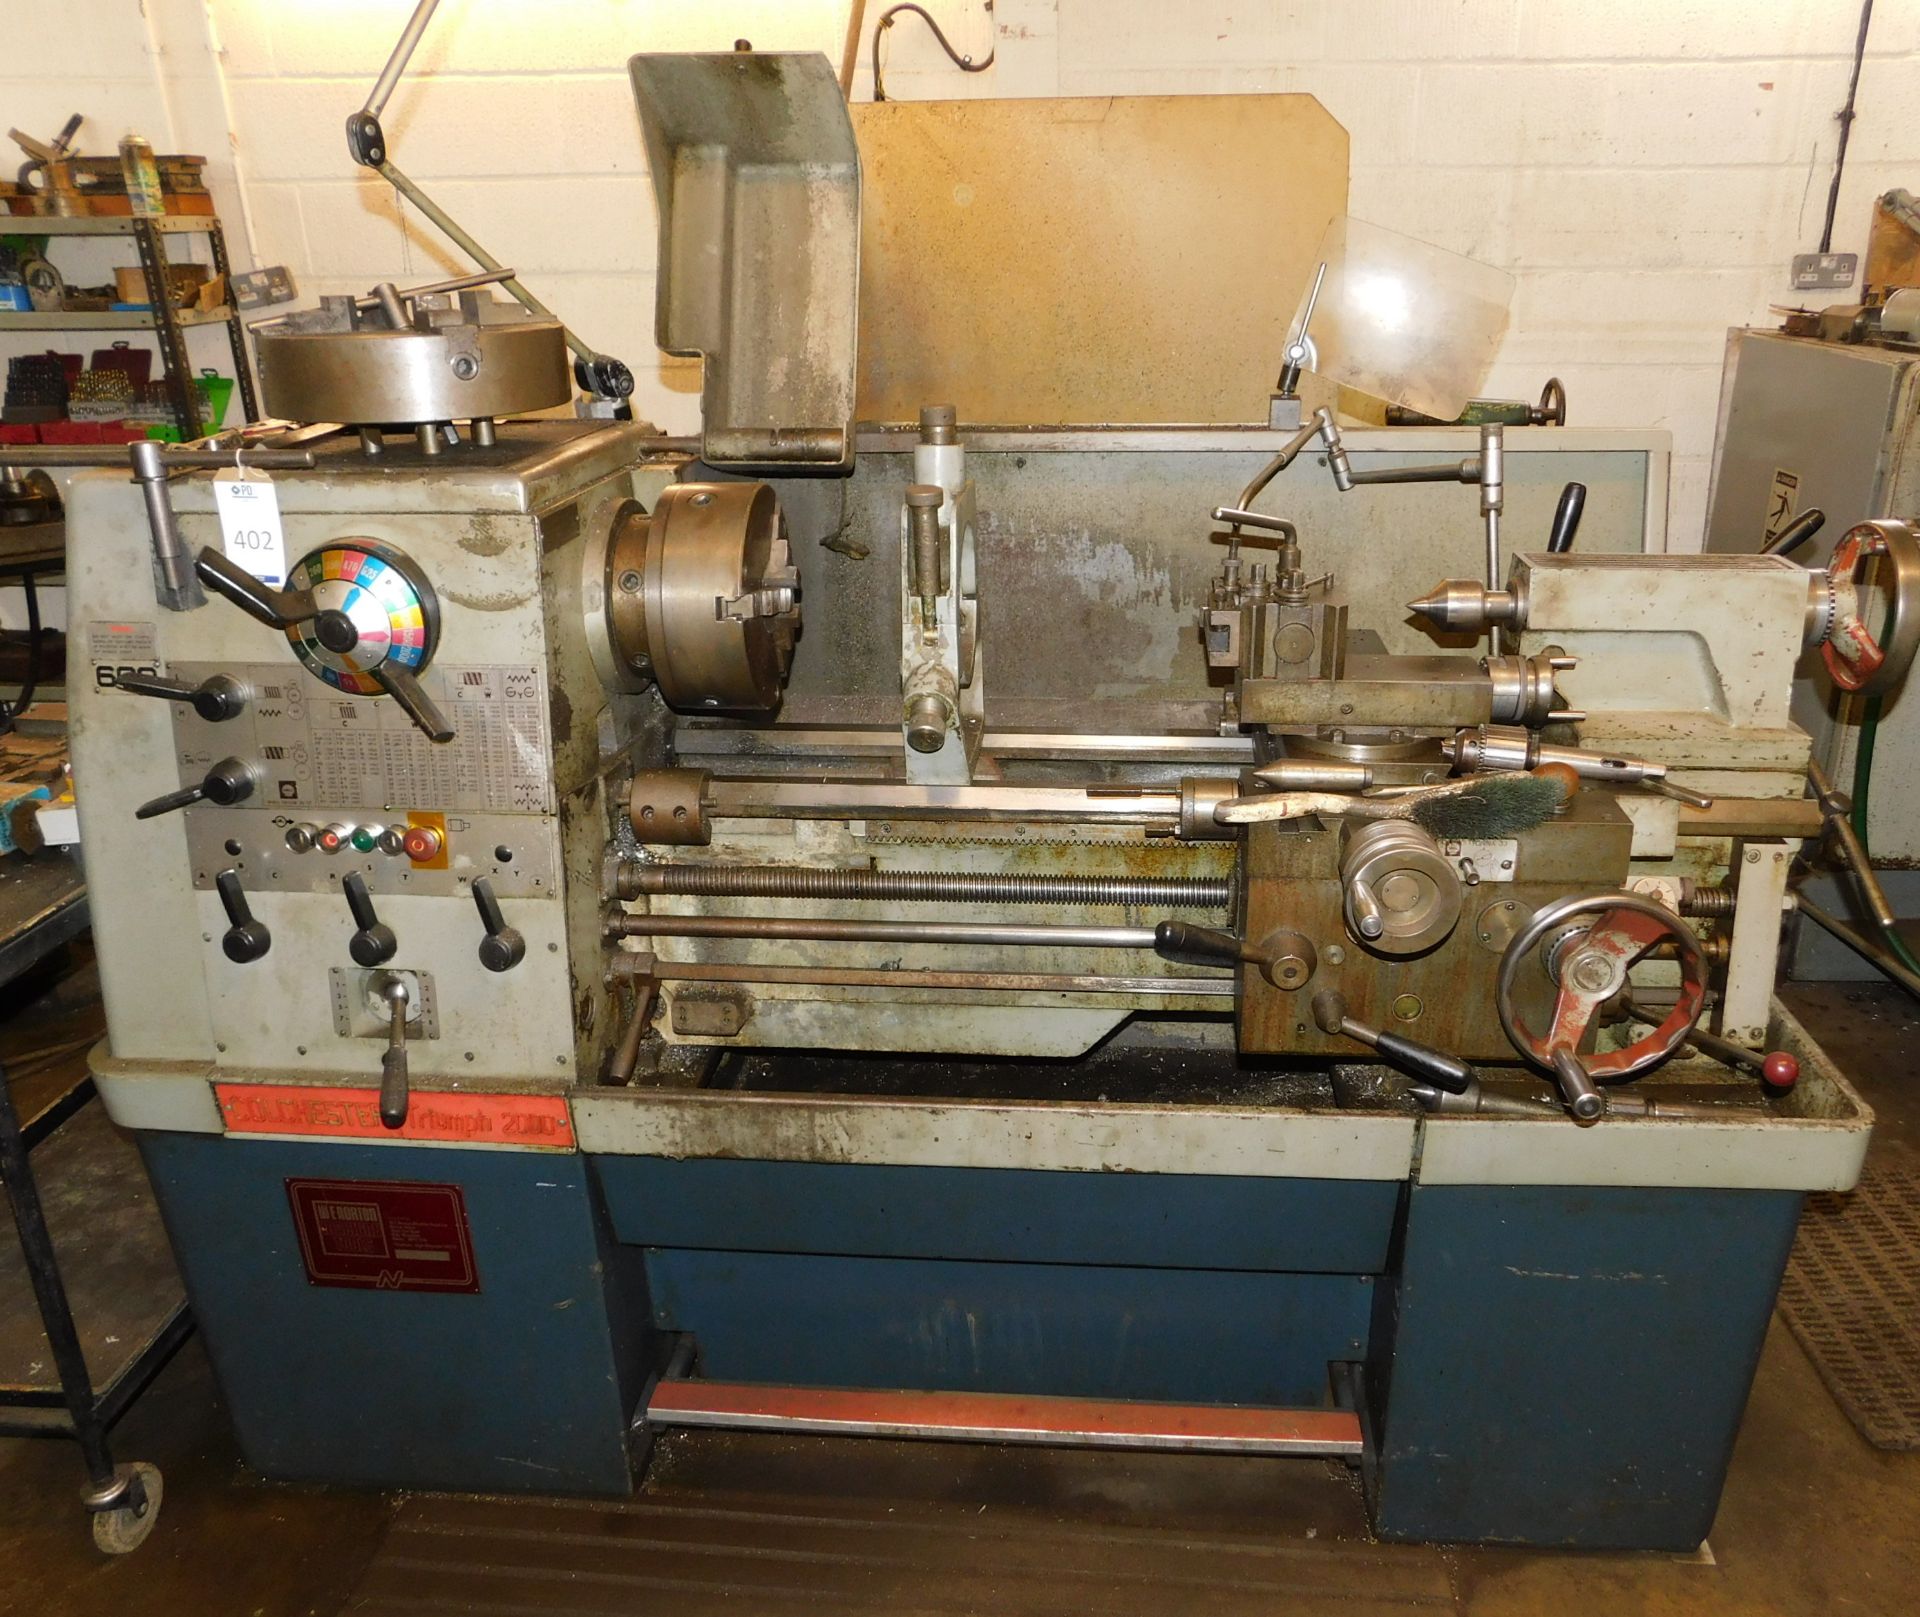 Colchester Triumph 2000 Gap Bed Lathe (29” between centres), 3 Phase (Location: Aylesbury – Please